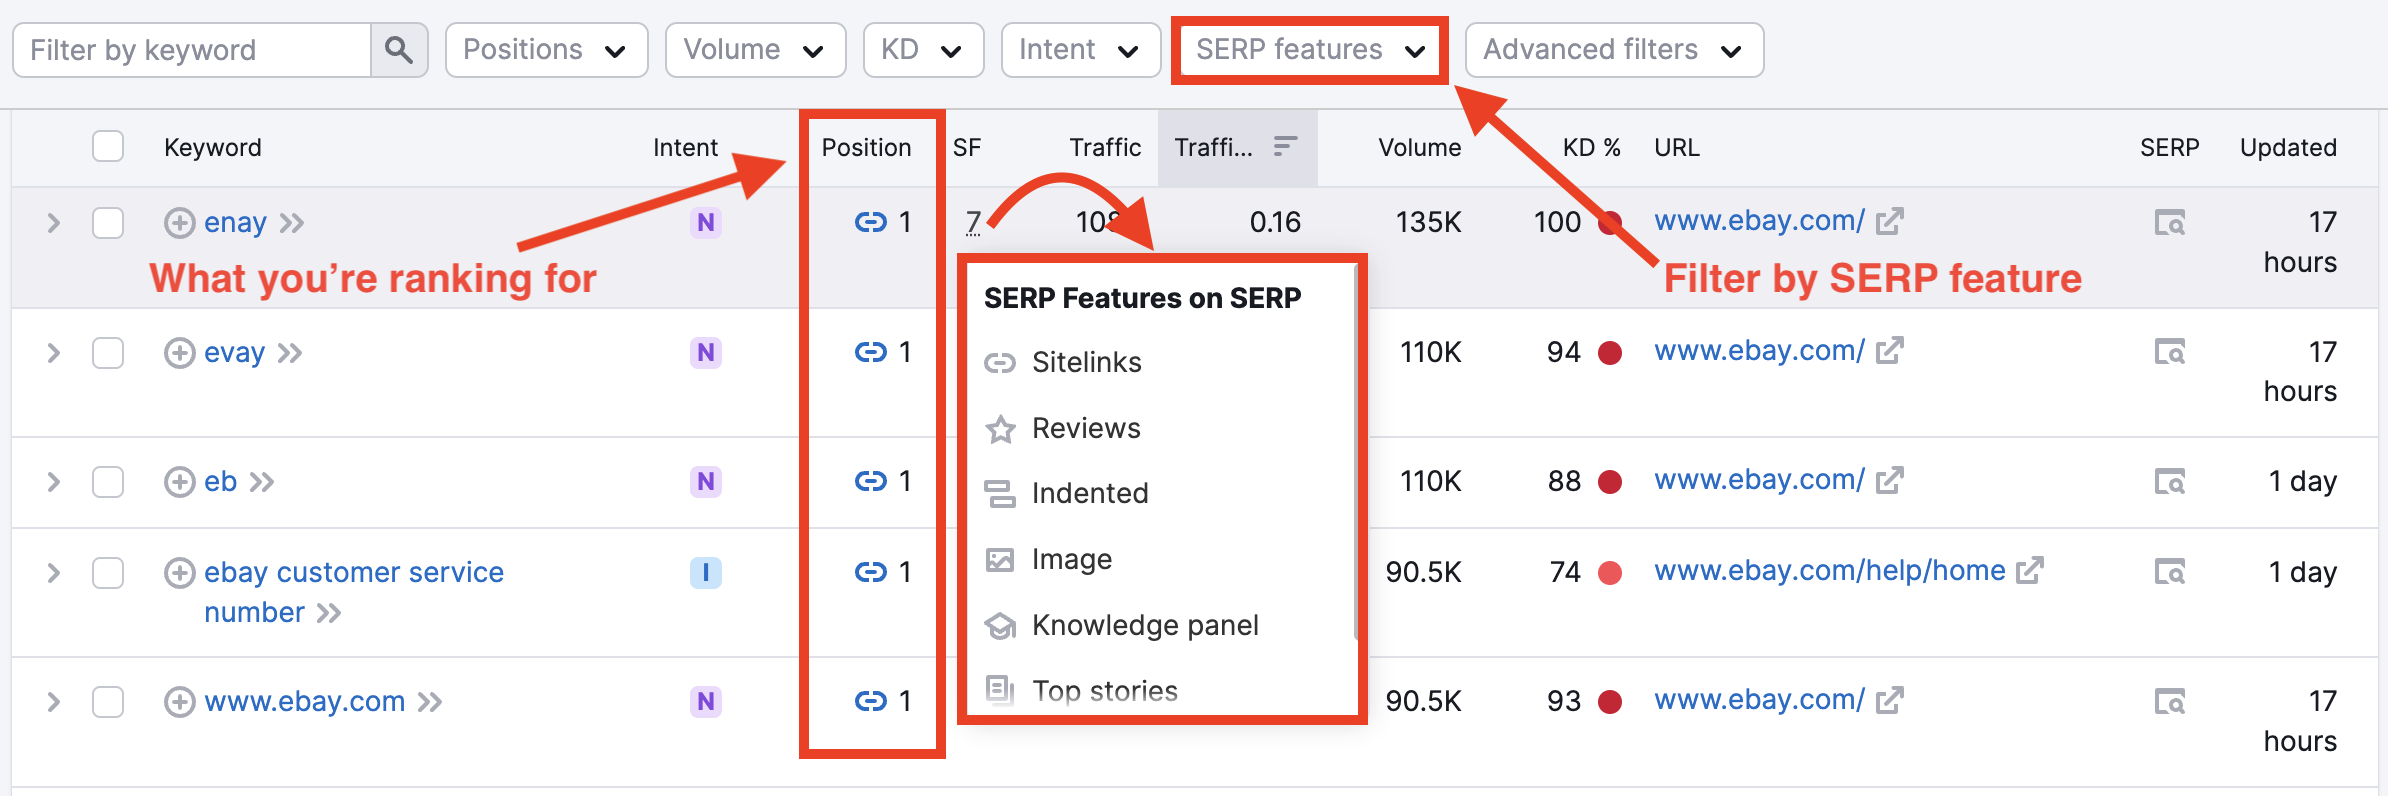 Organic Research - SERP features in the Positions report